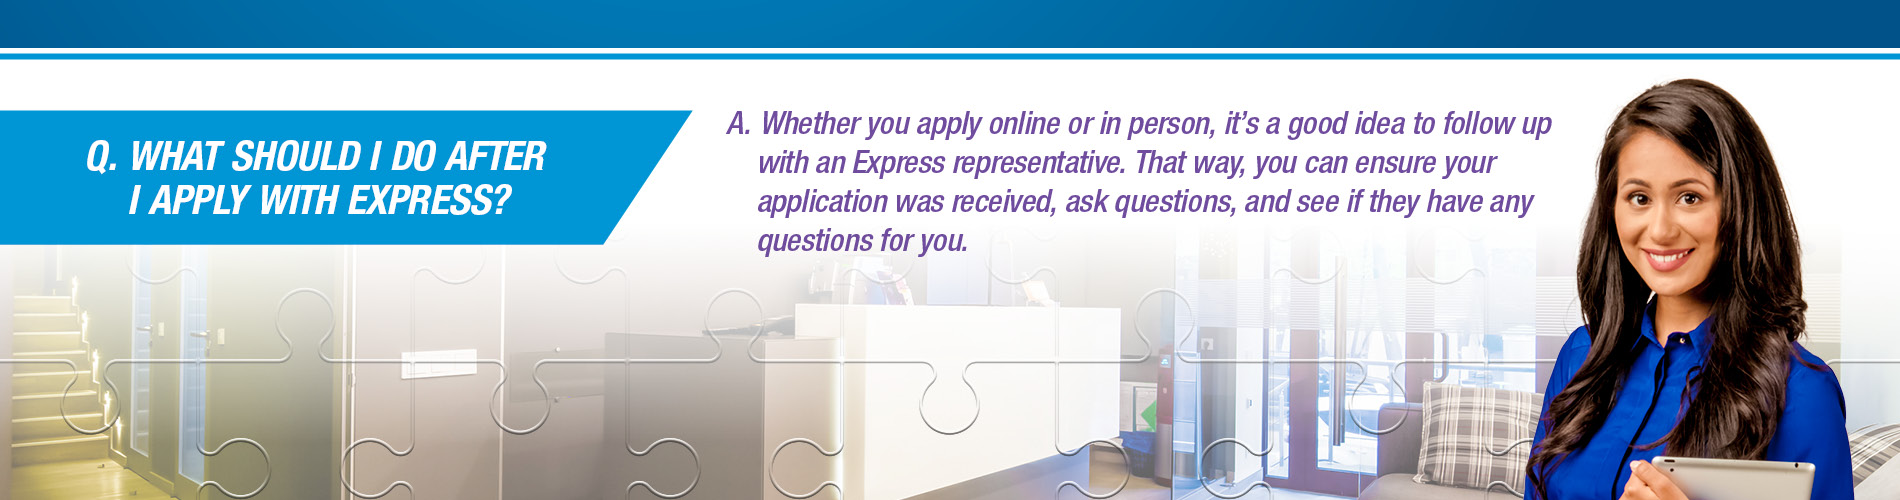 What Is Express? - What Should I Do After I Apply With Express?